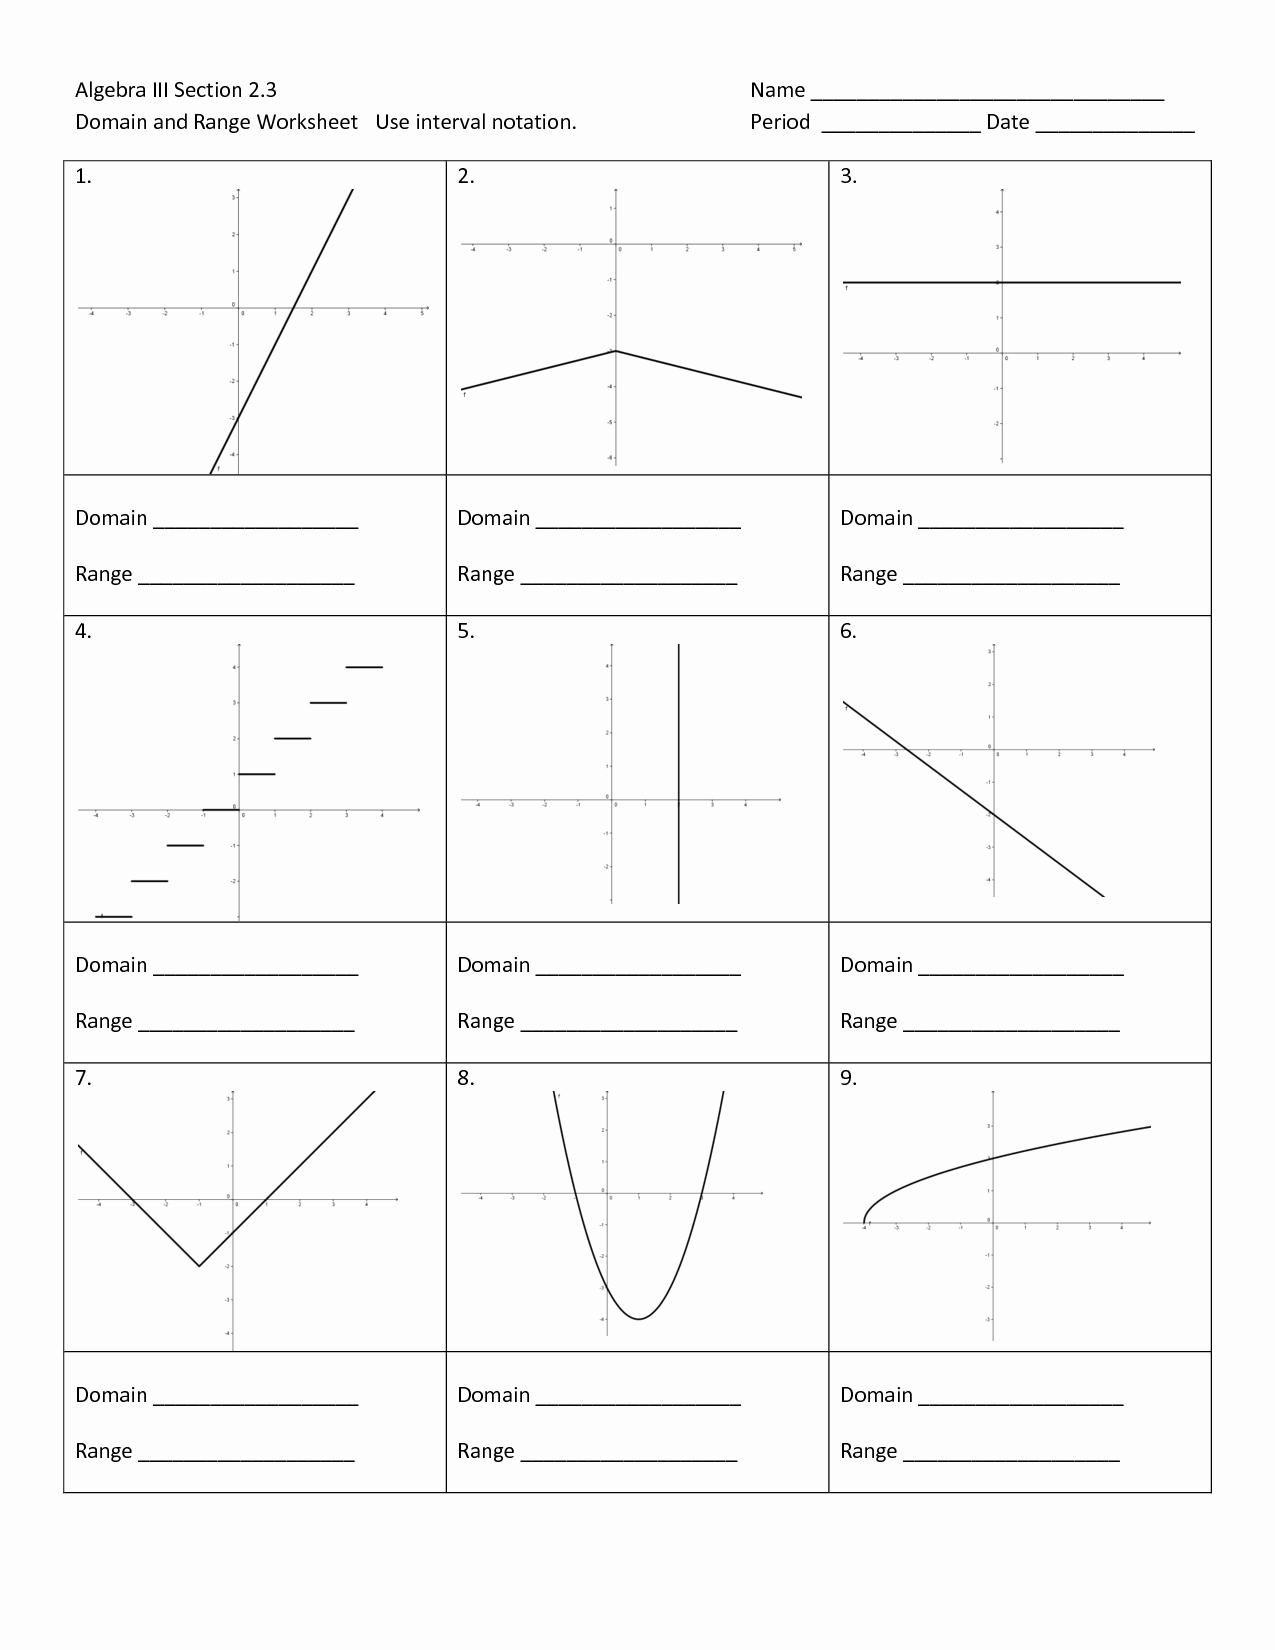 Domain and Range Of Graphs Worksheet Answers Beautiful Functions Domain and Range Worksheet